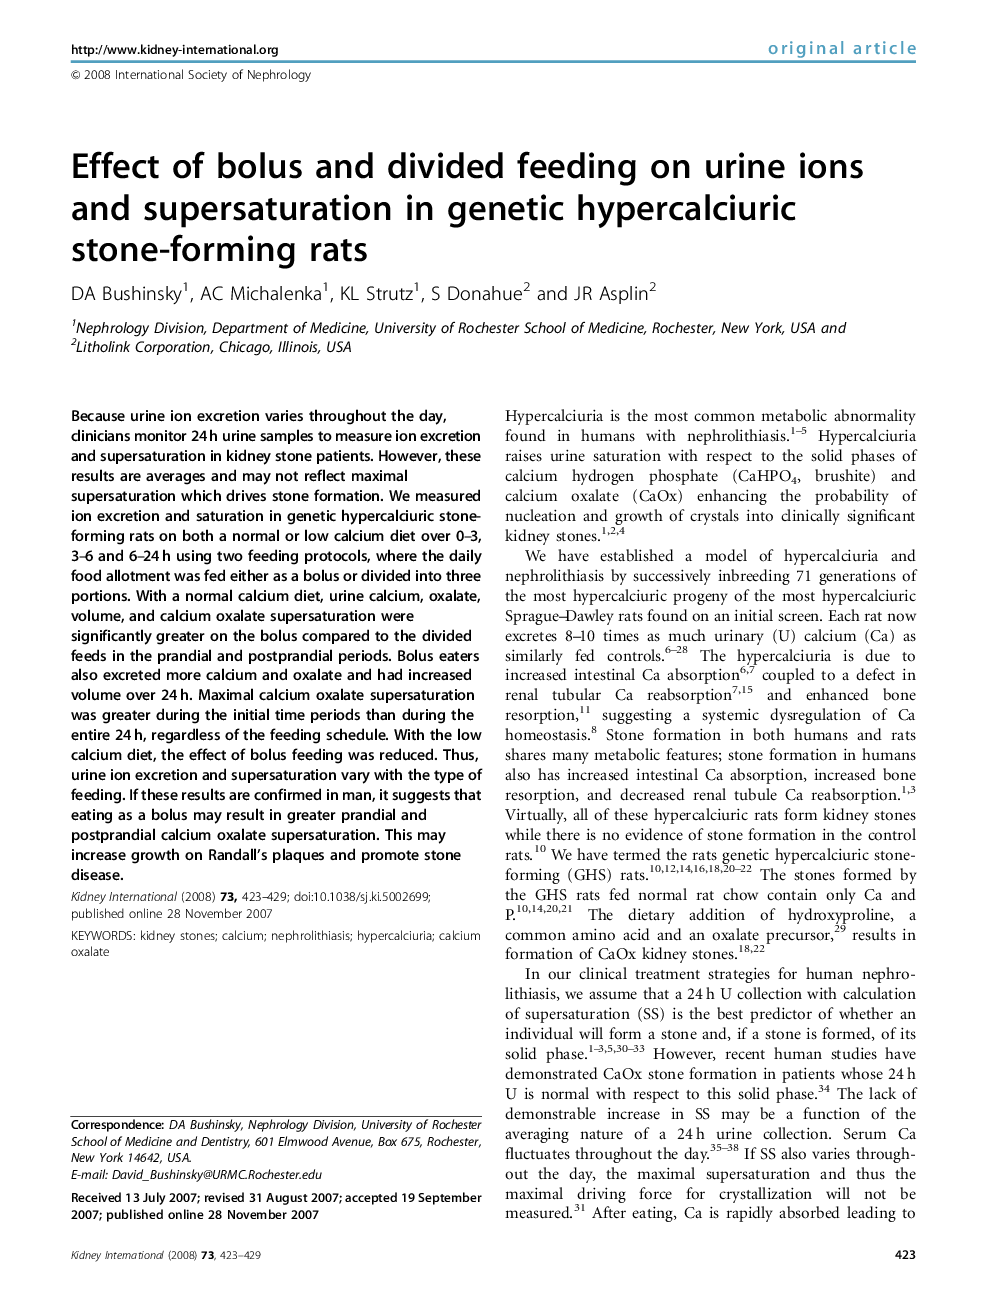 Effect of bolus and divided feeding on urine ions and supersaturation in genetic hypercalciuric stone-forming rats 